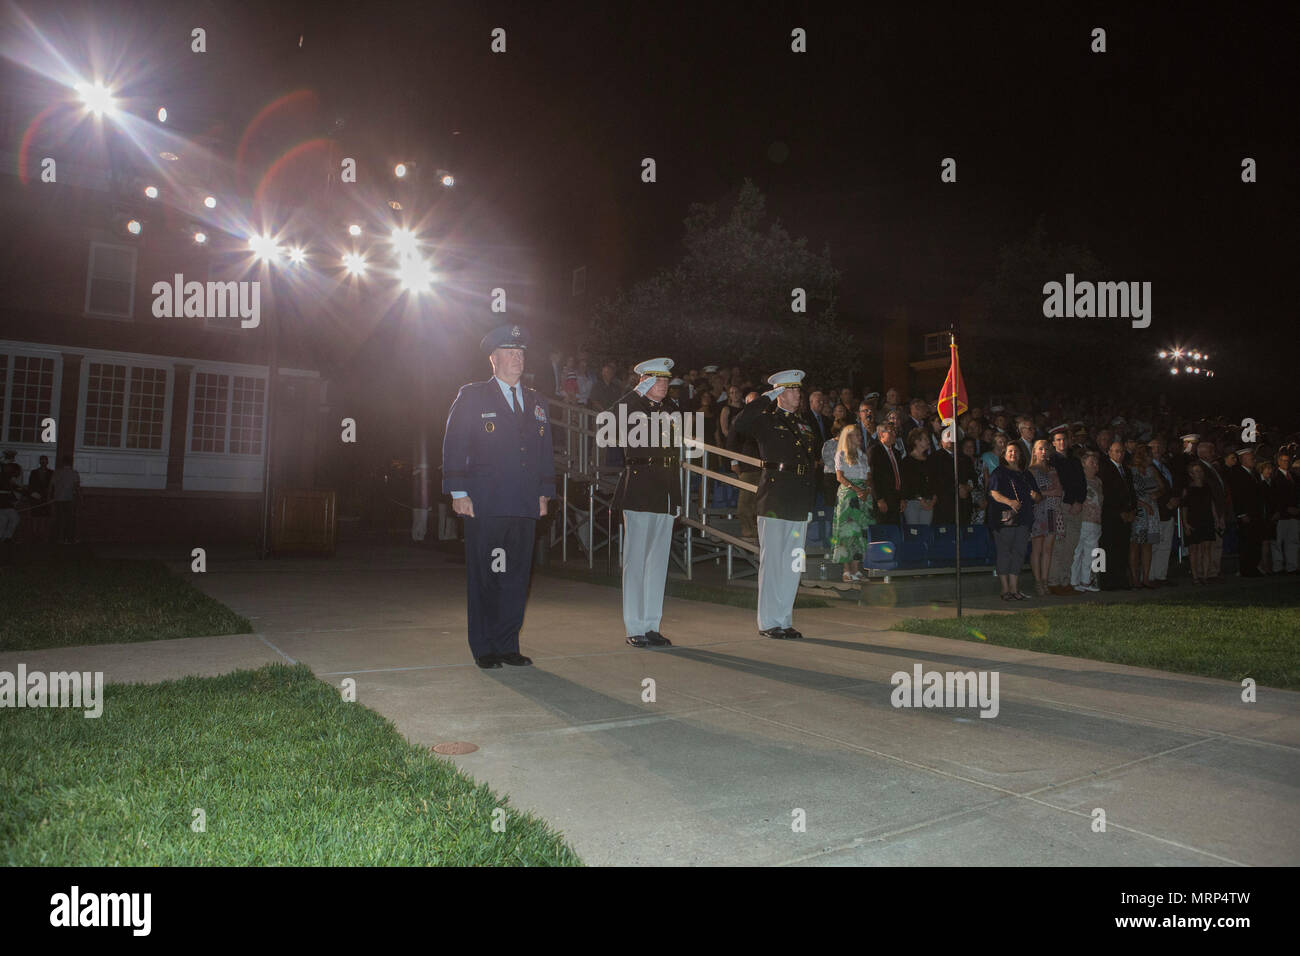 From left, U.S. Air Force Lt. Gen. Thomas J. Trask, vice commander of Headquarters U.S. Special Operations Command (SOCOM); Director Marine Corps Staff Lt. Gen. James B. Laster; and Col. Tyler J. Zagurski, commanding officer, Marine Barracks Washington, render honors during an evening parade at Marine Barracks Washington, Washington, D.C., June 23, 2017. Evening parades are held as a means of honoring senior officials, distinguished citizens and supporters of the Marine Corps. (U.S. Marine Corps photo by Lance Cpl. Stephon L. McRae) Stock Photo